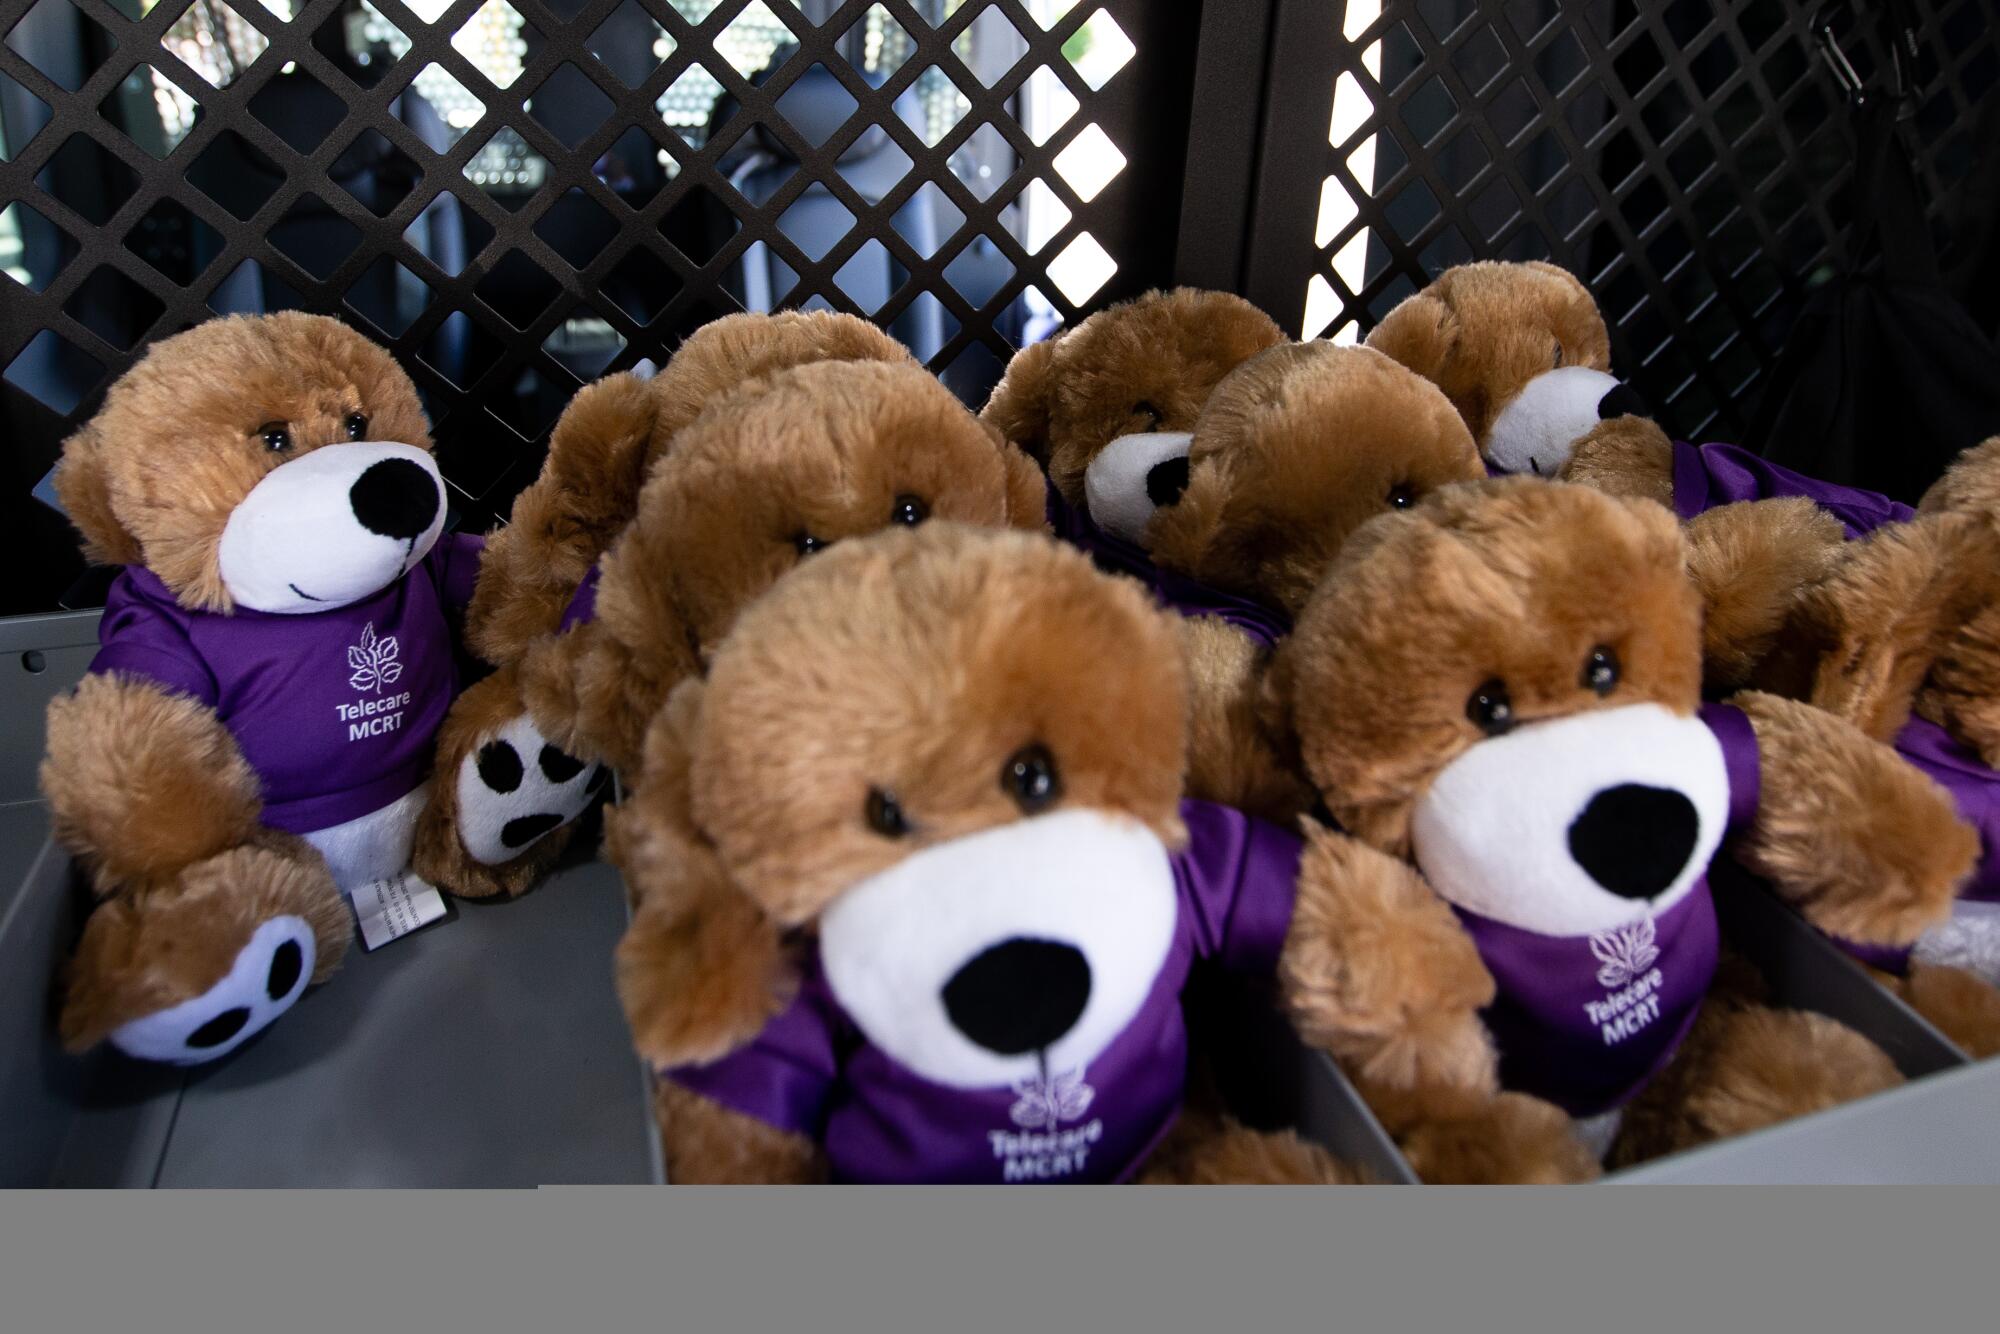 A bunch of stuffed toy dogs in purple shirts